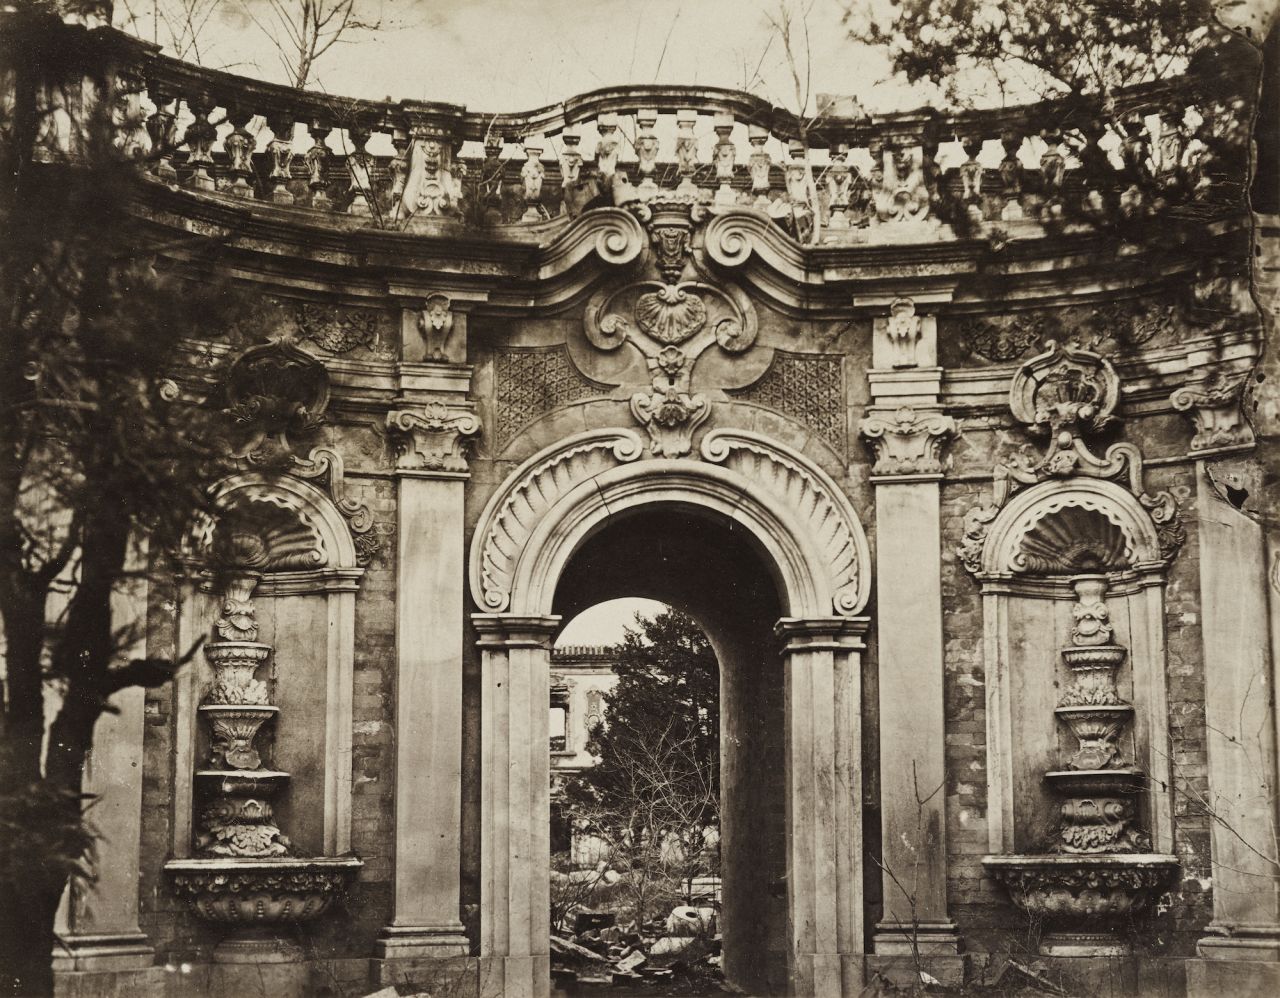 Thomas Child's pictures show architectural details of Beijing's Old Summer Palace, which was largely destroyed by Anglo-French forces in 1860. 